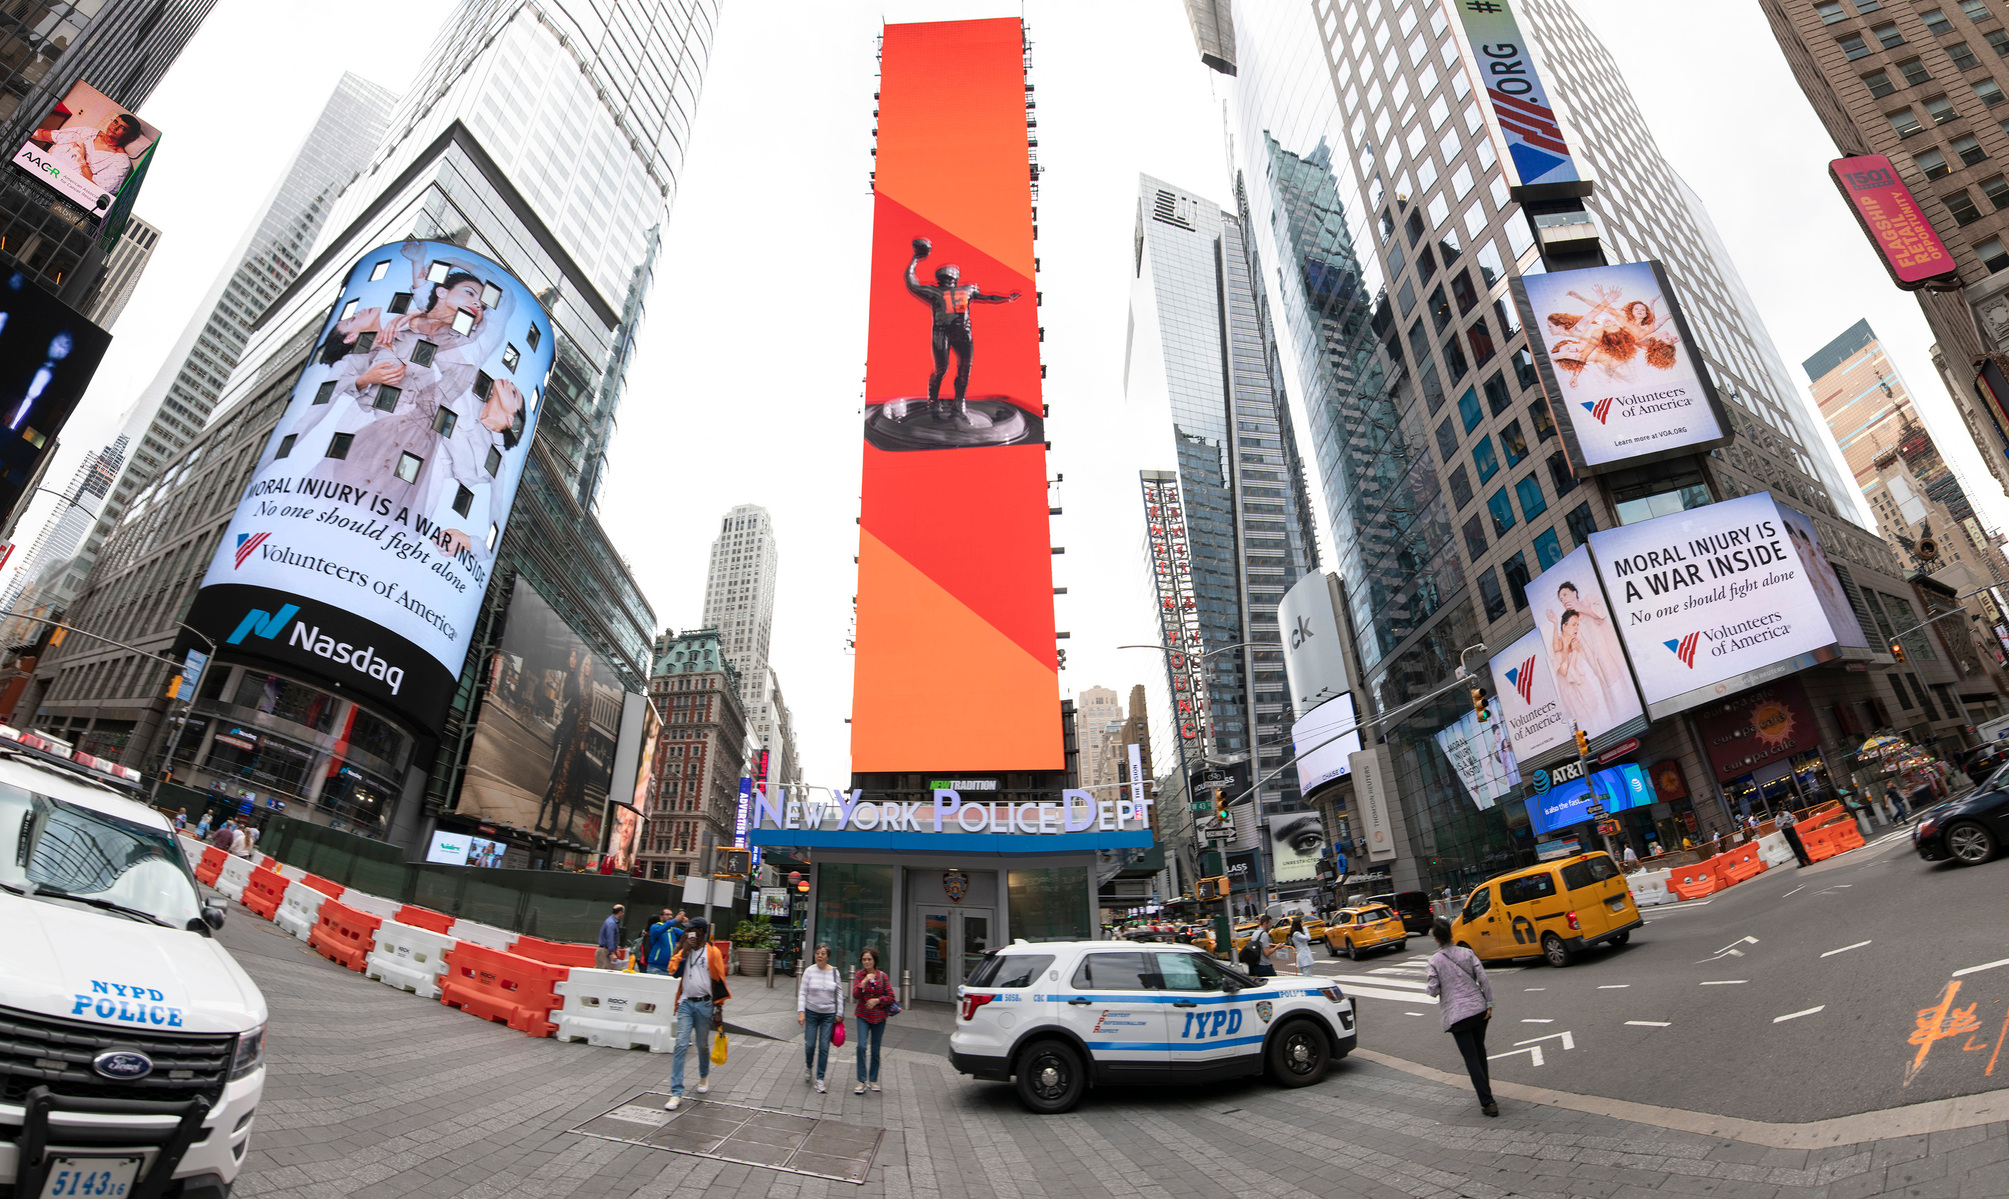 The Volunteers of America campaign photographed by Nir Arieli in Times Square NYC at daytime